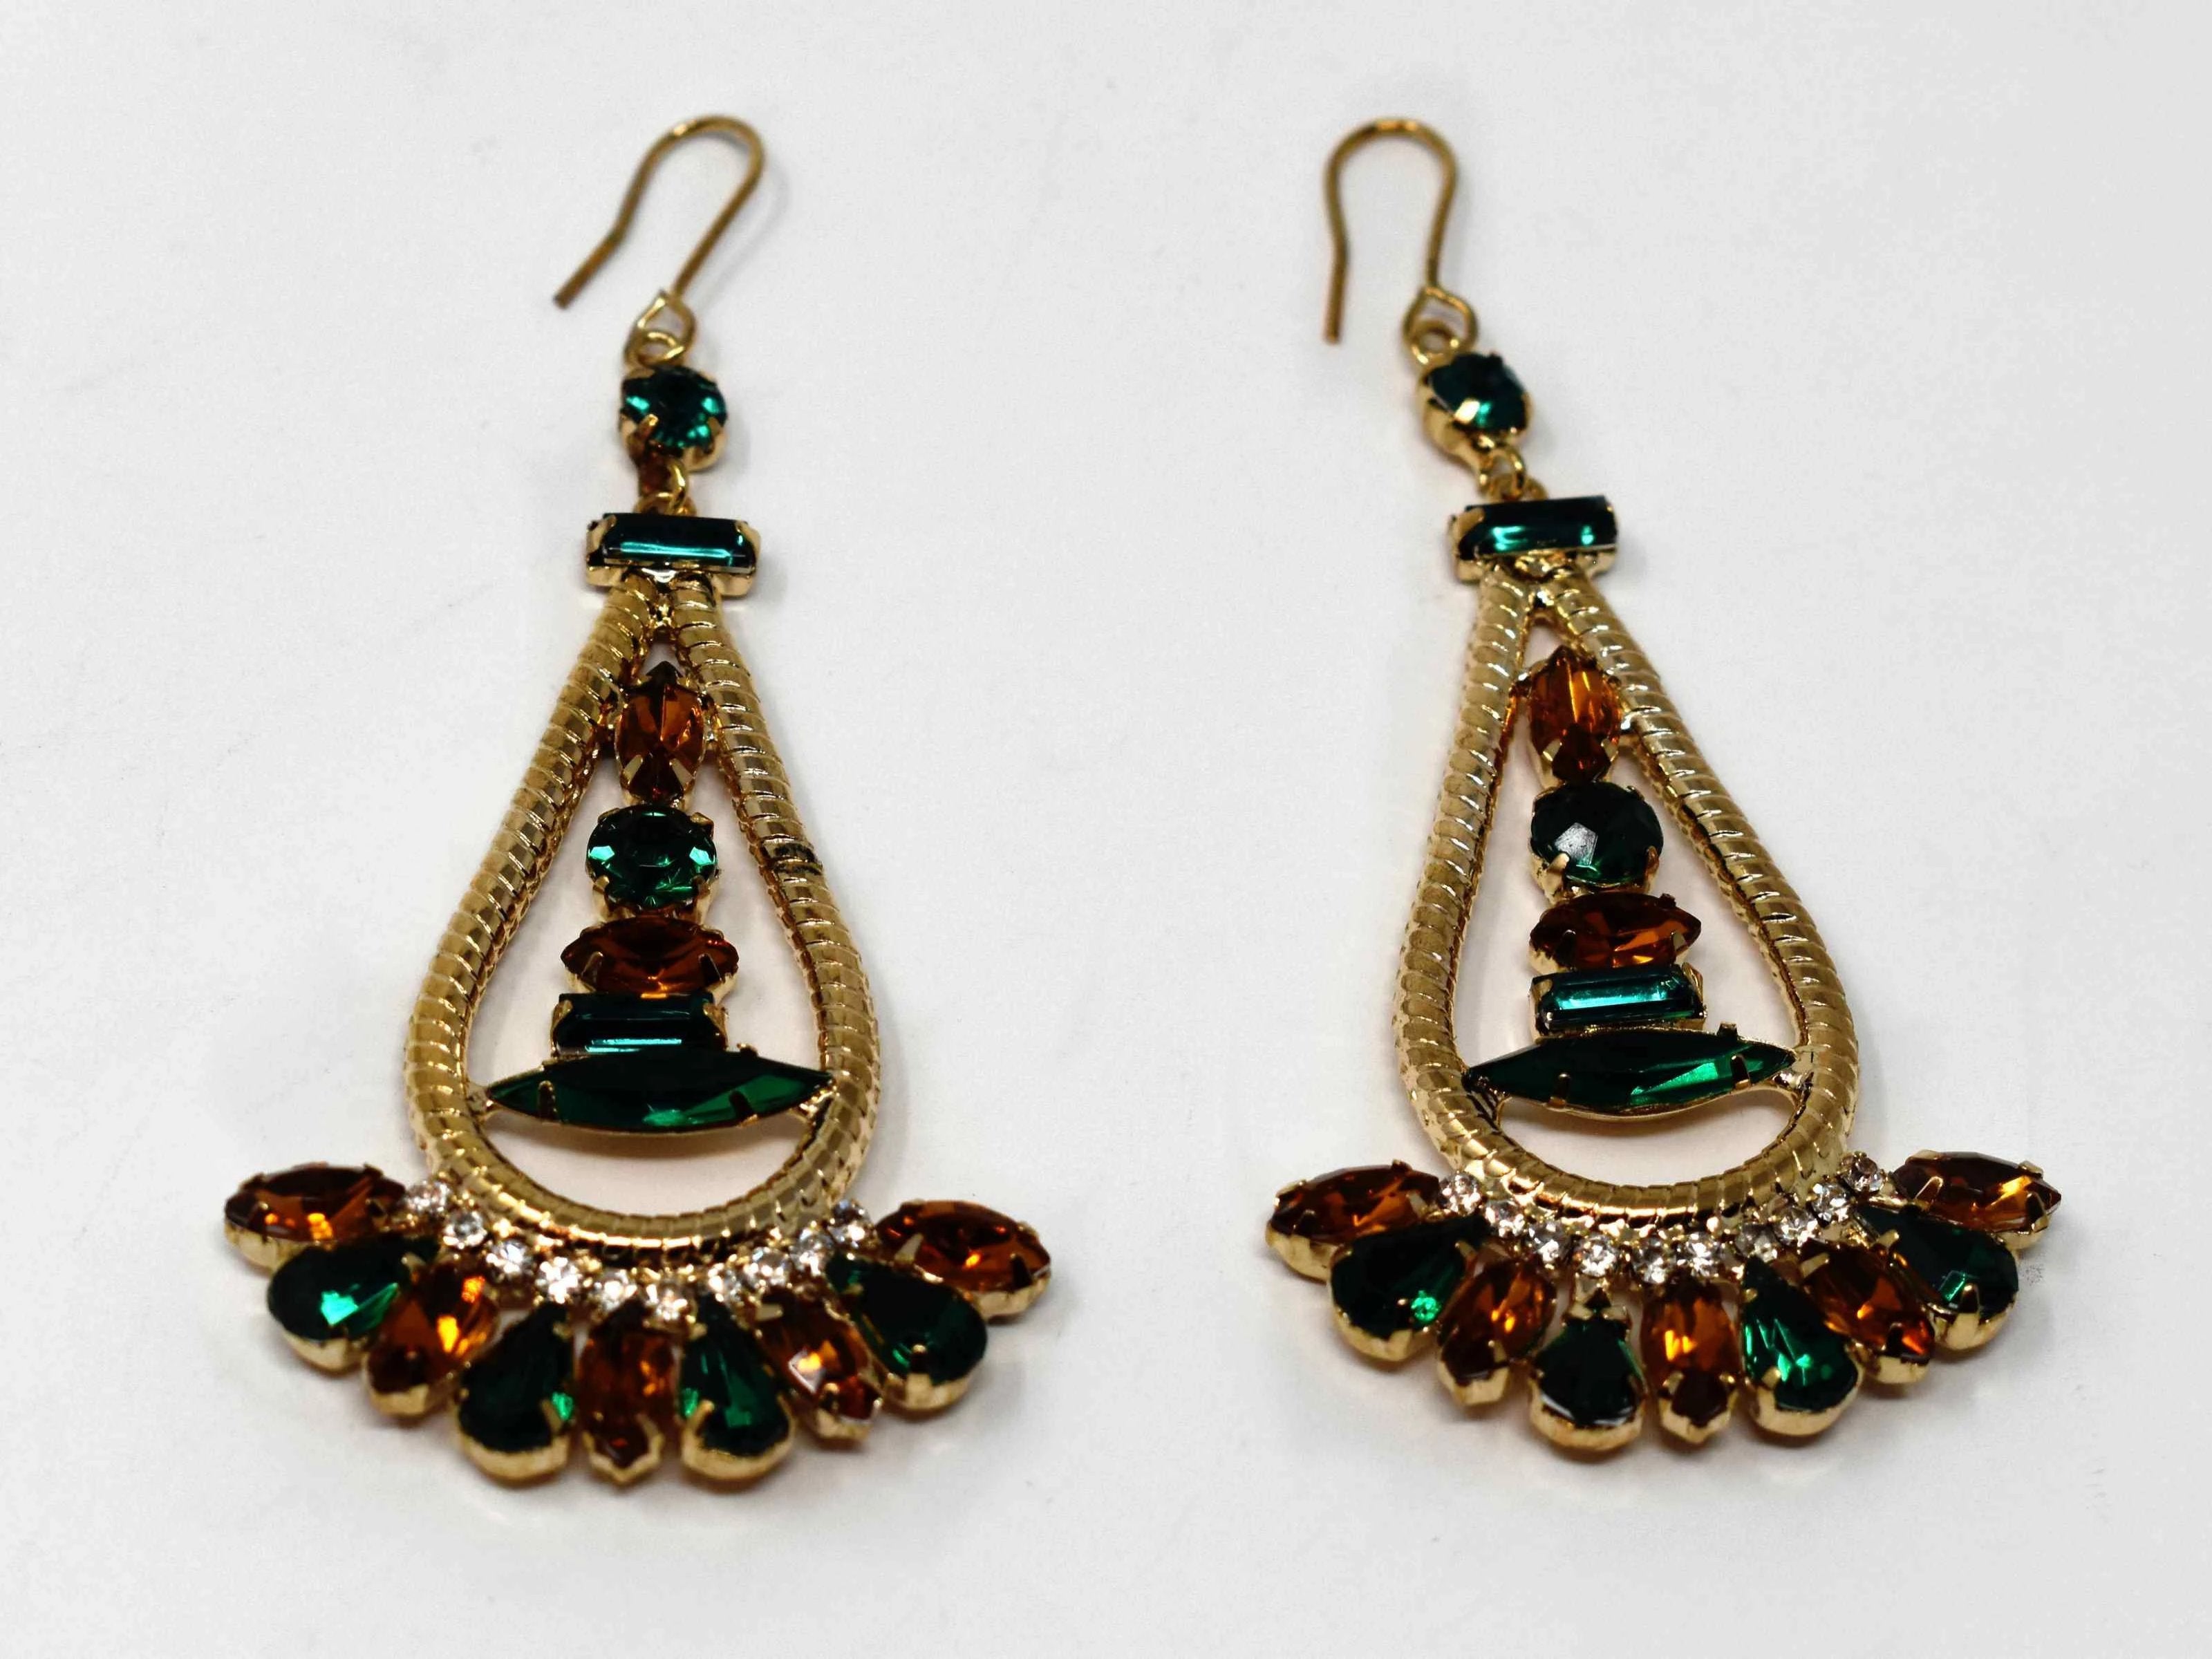 Anemone is a gold with a bronze and green stone eye catching drop , dangle style earring. It comes with a fish hook clasp and is 3 inches in length.